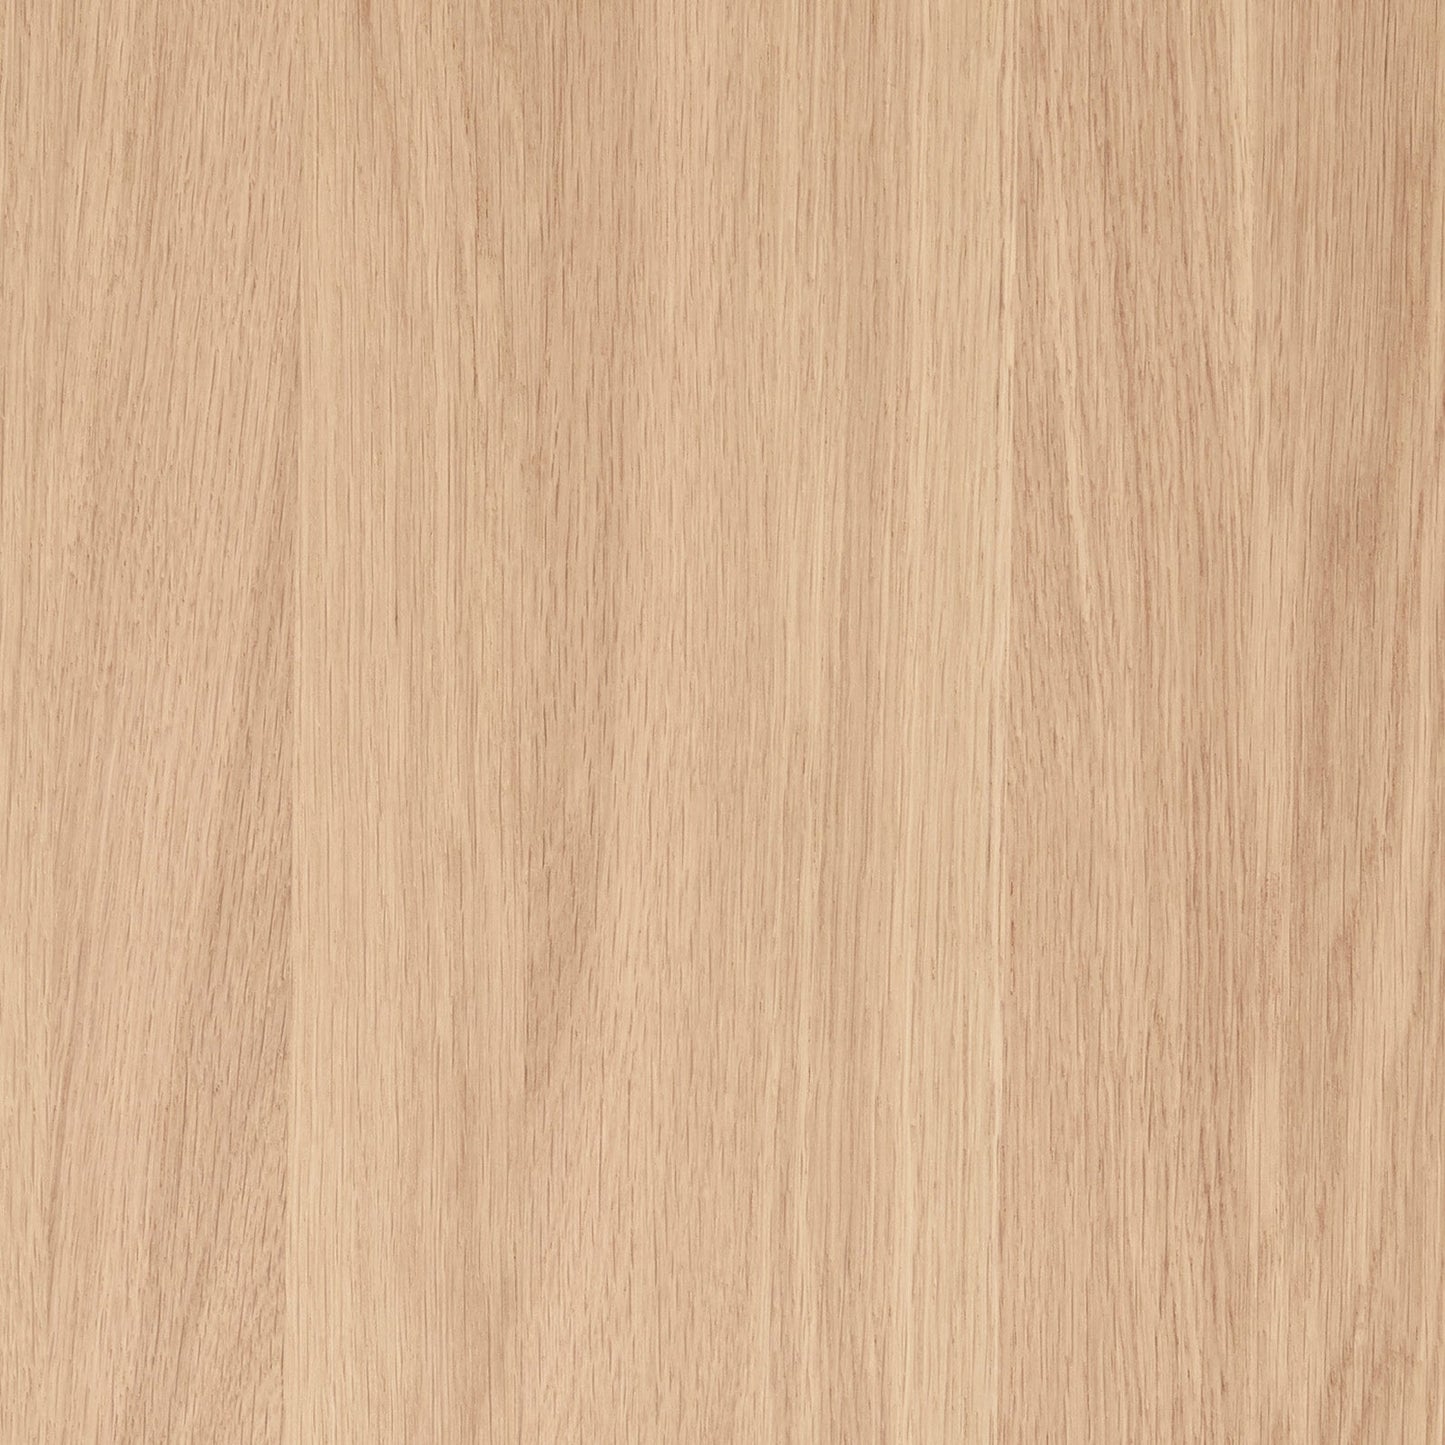 Solid Oak, Glossy Lacquer